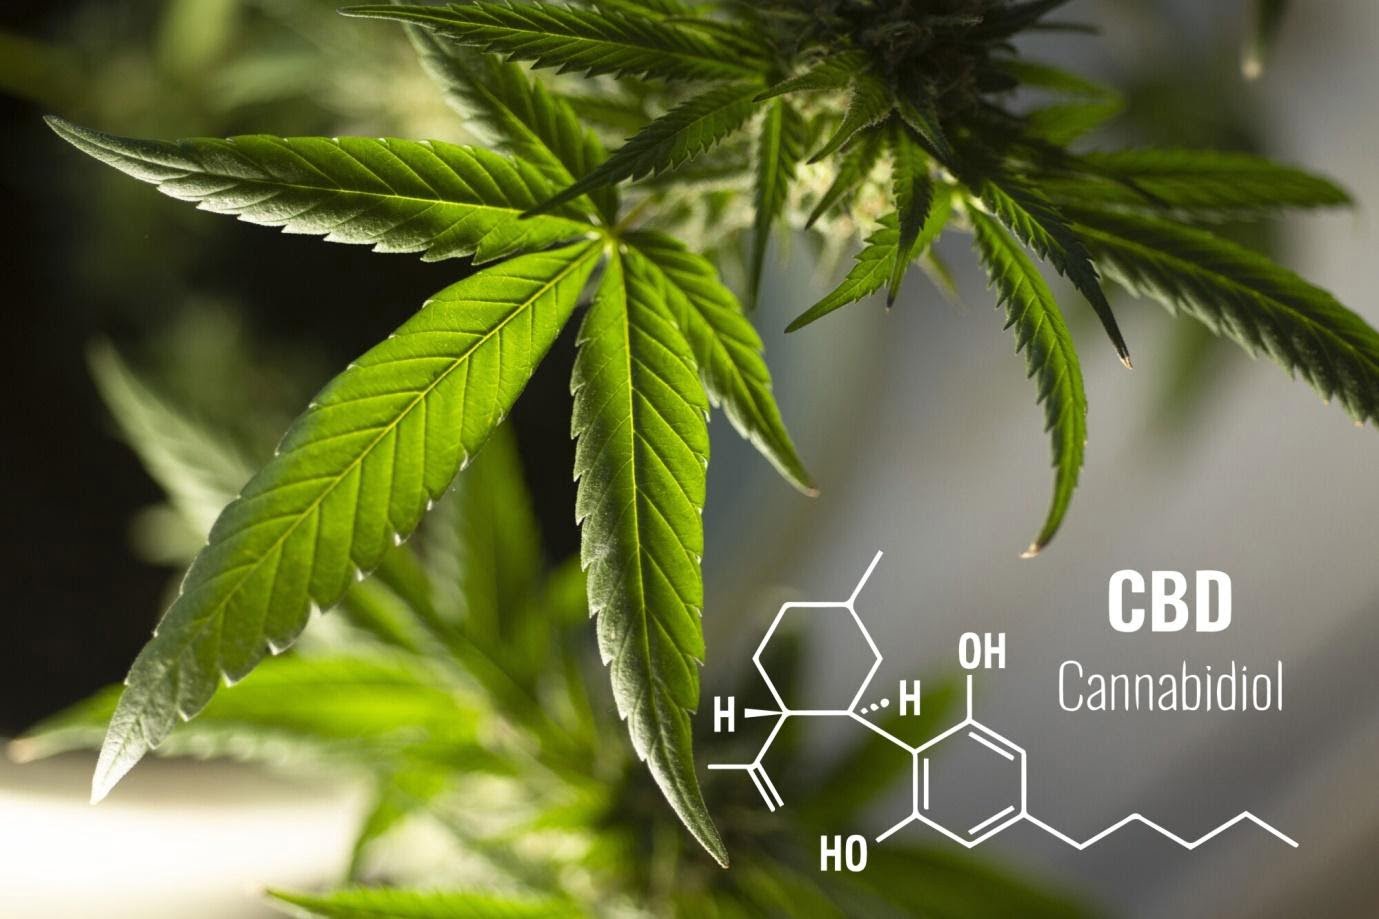 Online CBD Shopping: Common Mistakes and How to Avoid Them